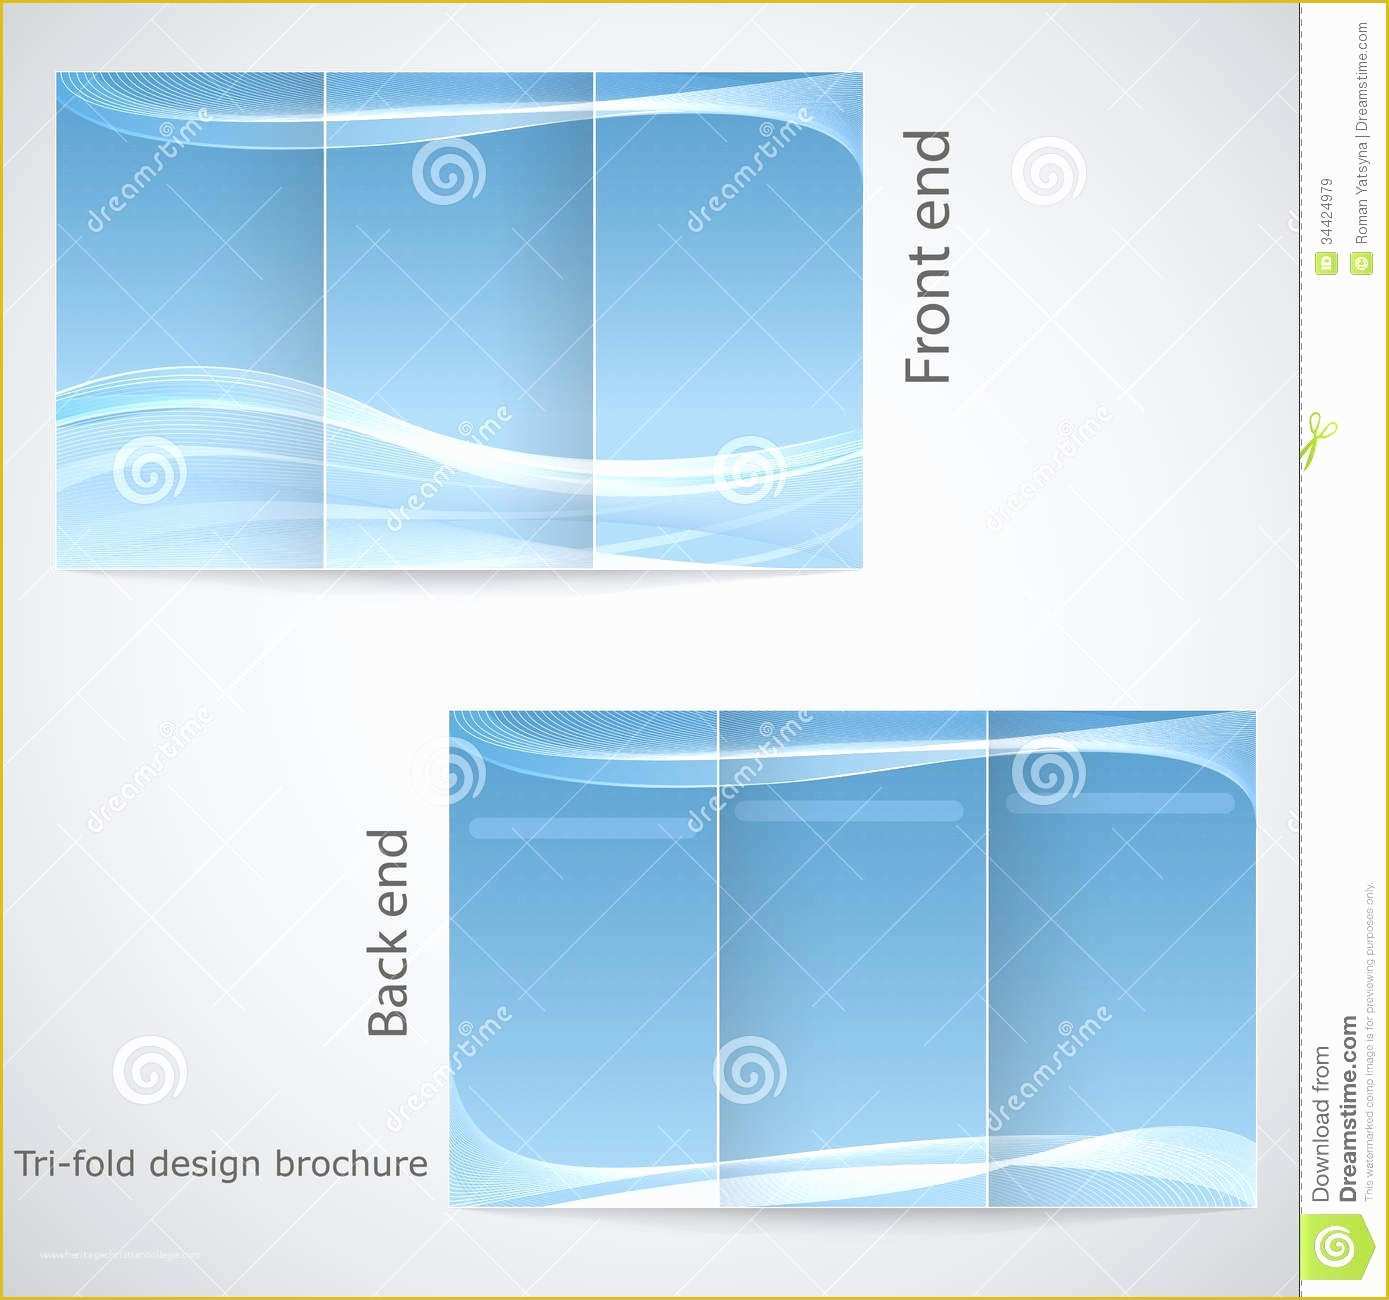 3 Fold Brochure Template Free Download Of Free Brochure Template for Word Sign Up Sheet Car